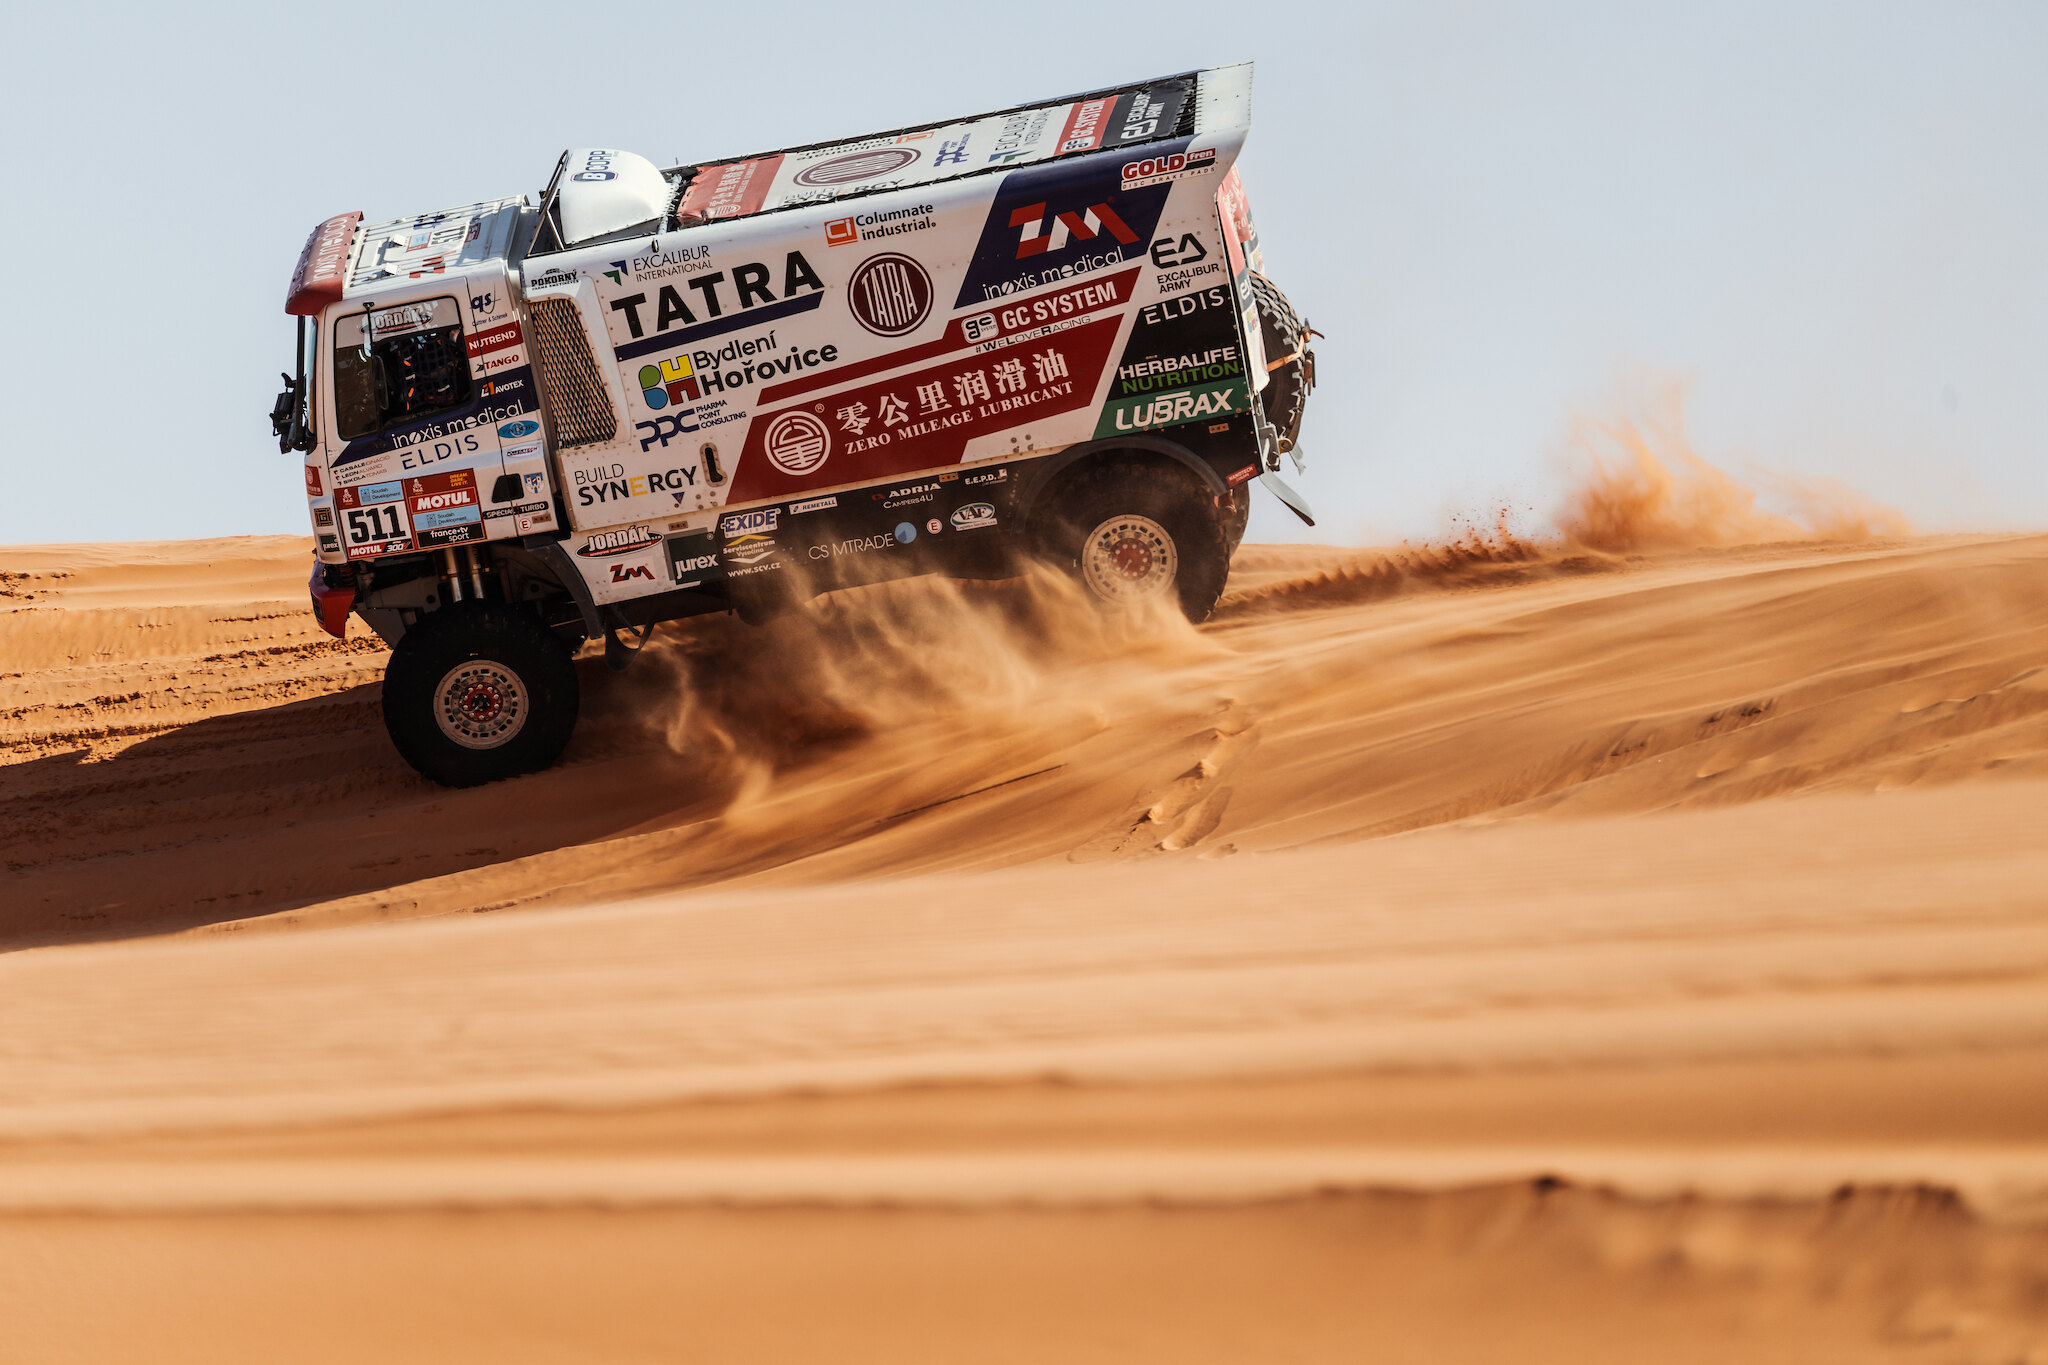 Martin Koloc: The second part of the 2022 Dakar Rally started unexpectedly well for us